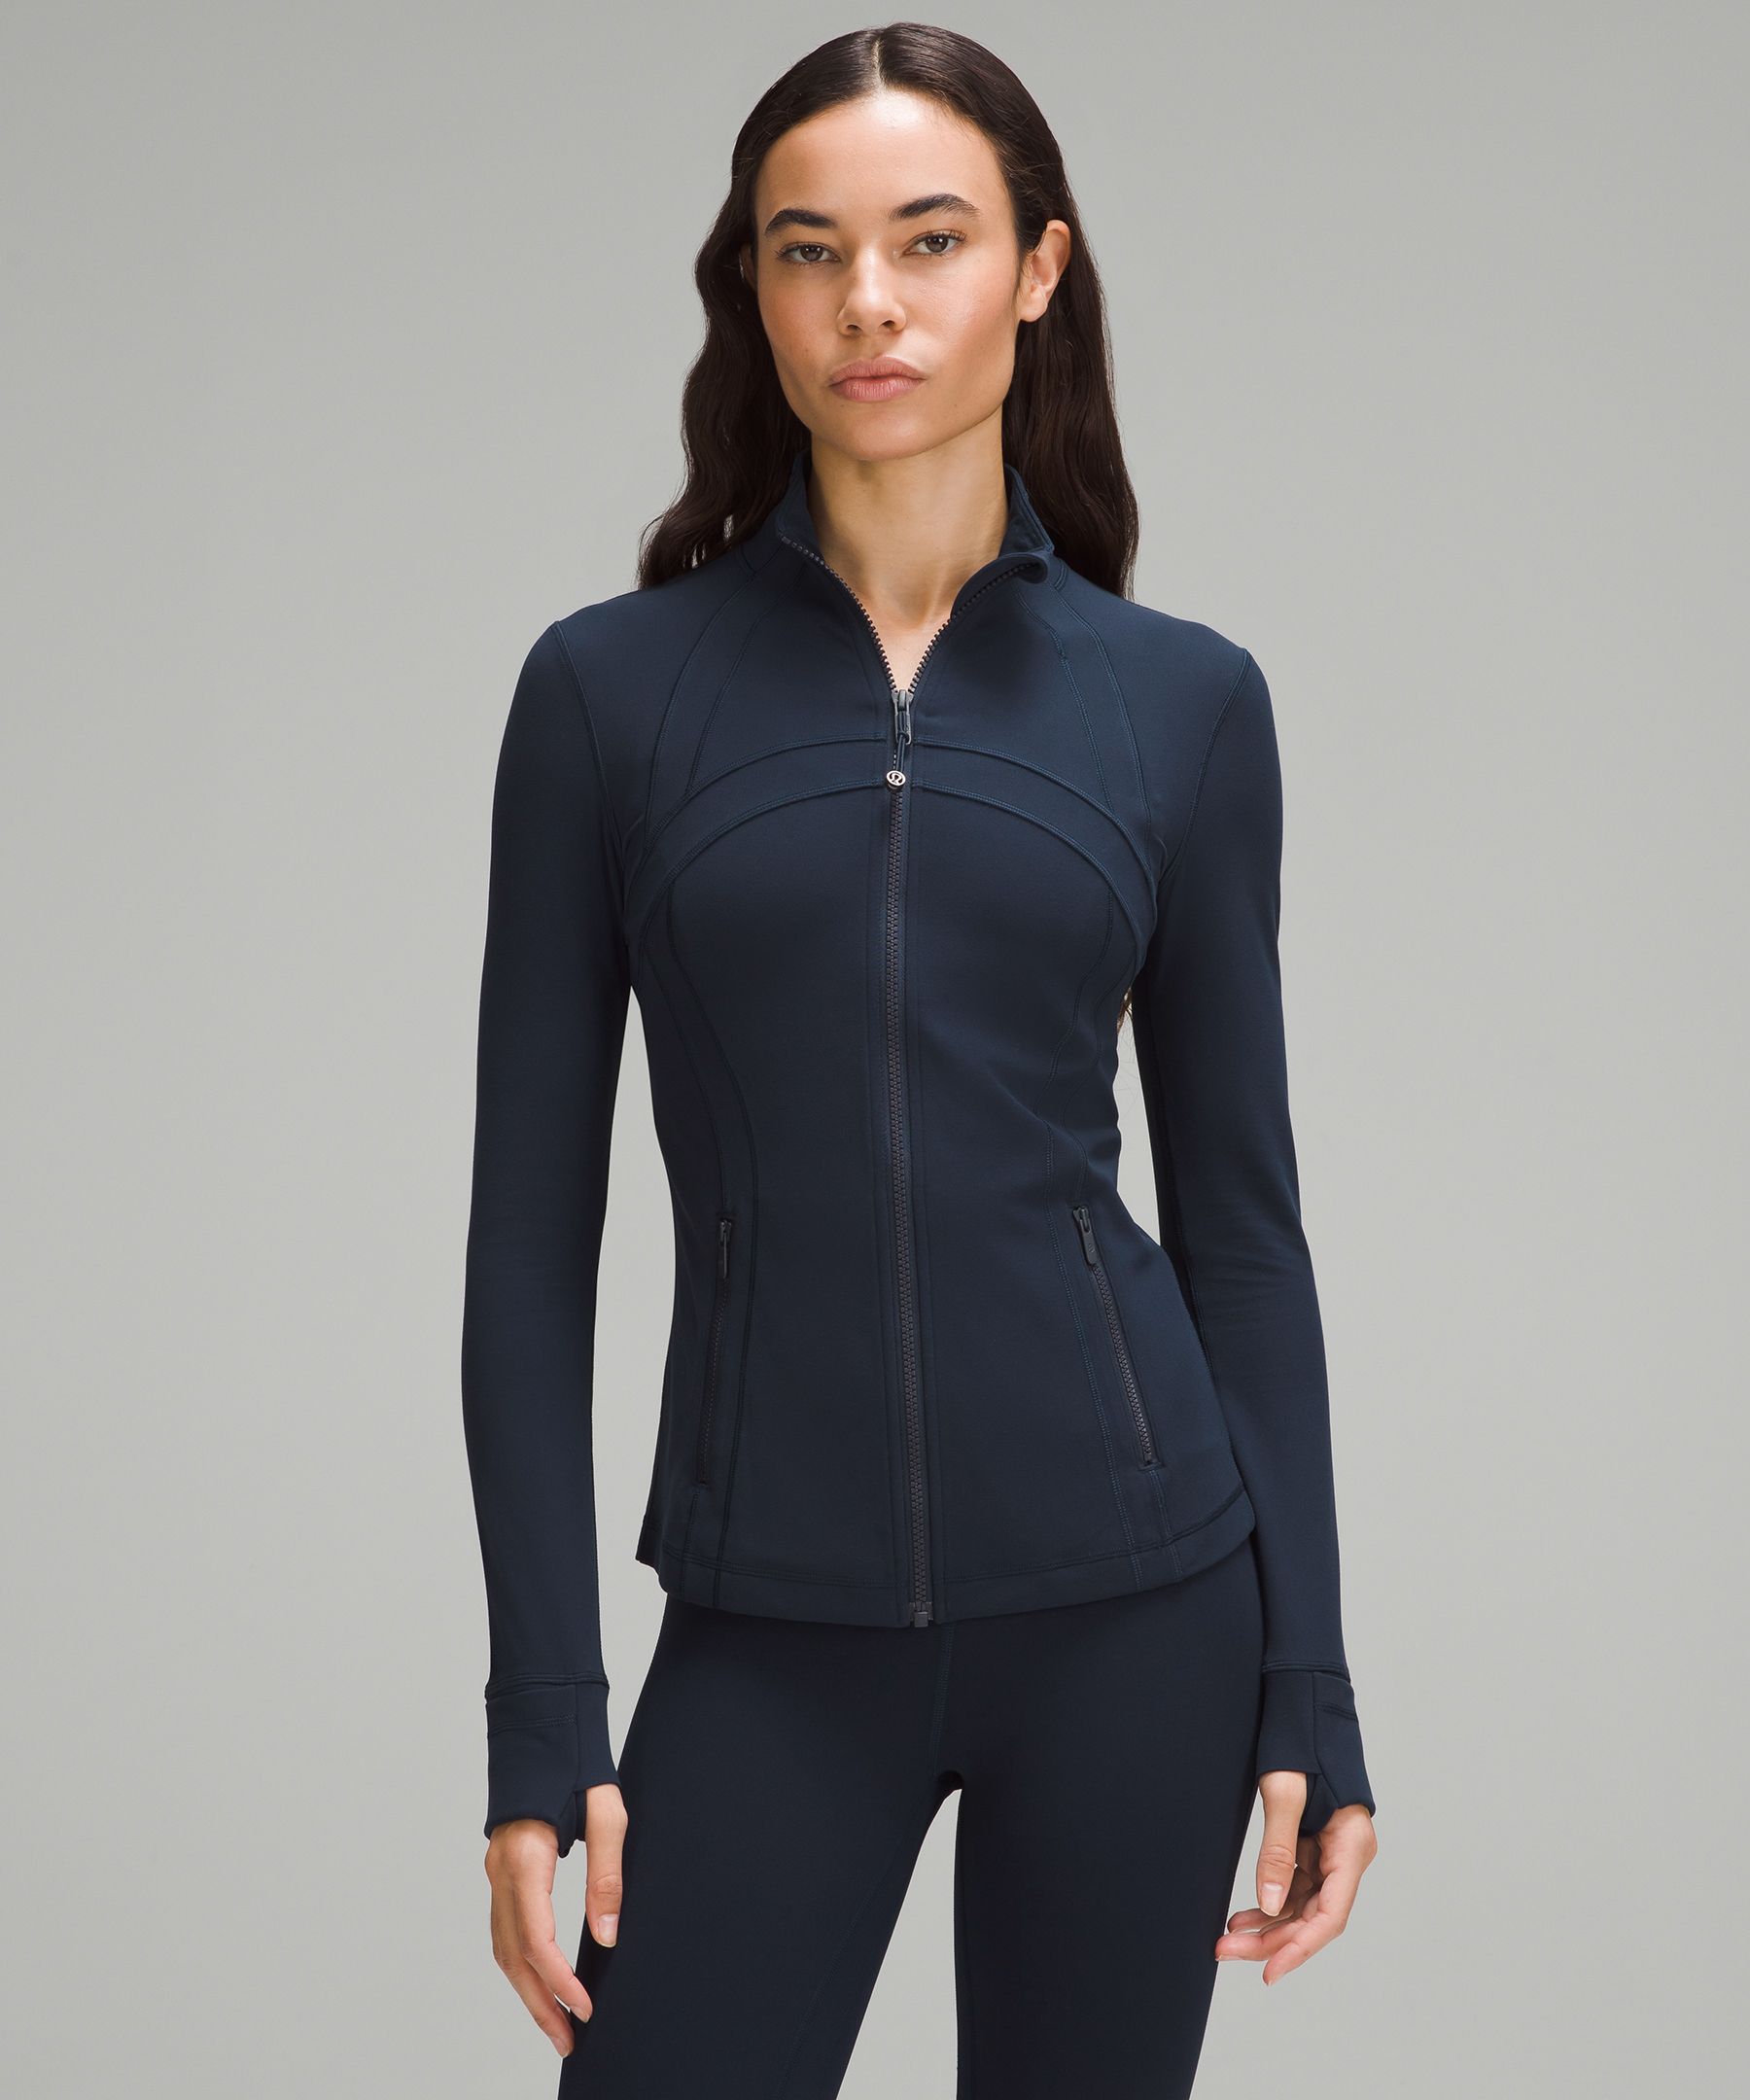 IVIVVA Lululemon Jacket Perfect Your Practice Cuffins Thumbies GIRLS 14